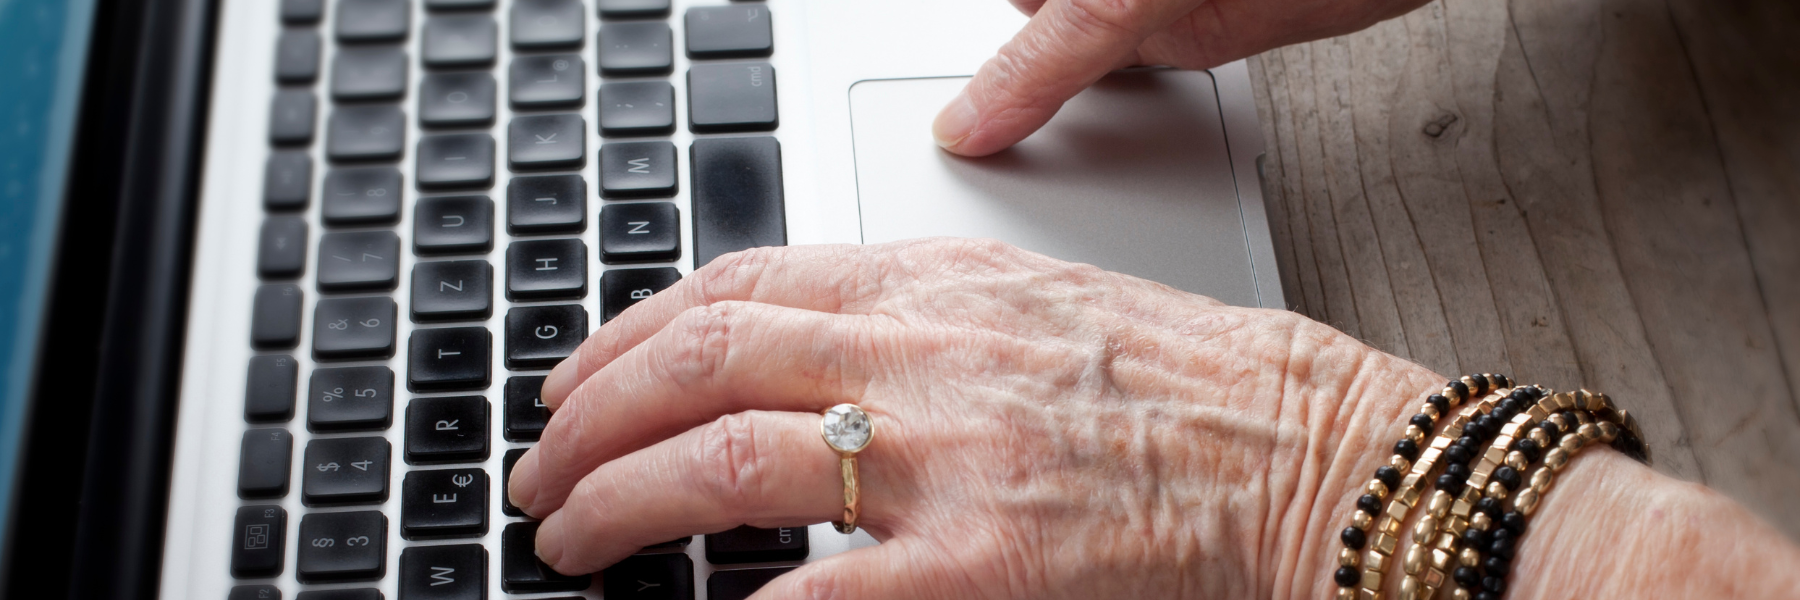 Older person typing on computer